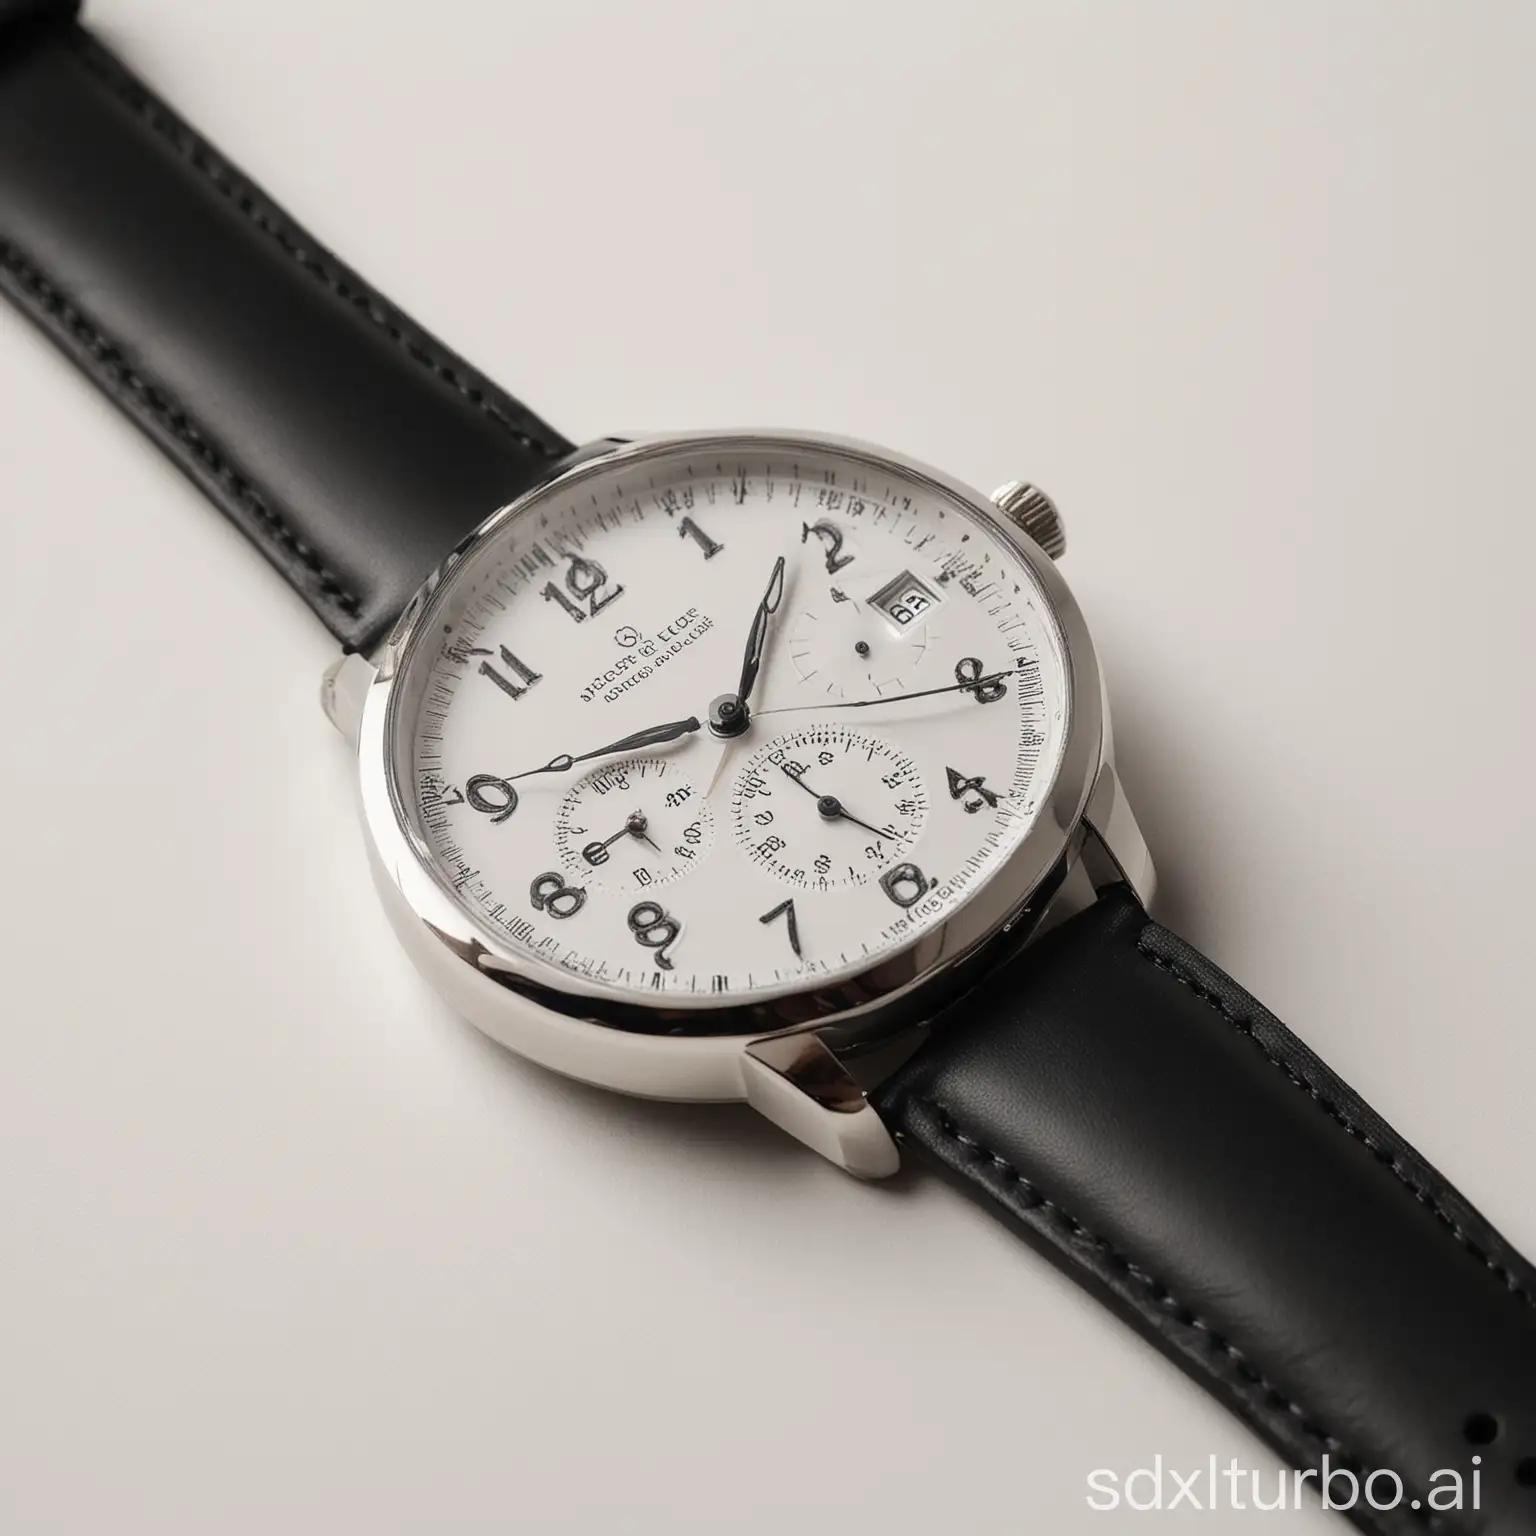 A close-up of a silver watch with a black leather band. The watch has a round face with a small second hand and a date window at the three o'clock position. The watch is resting on a white background.